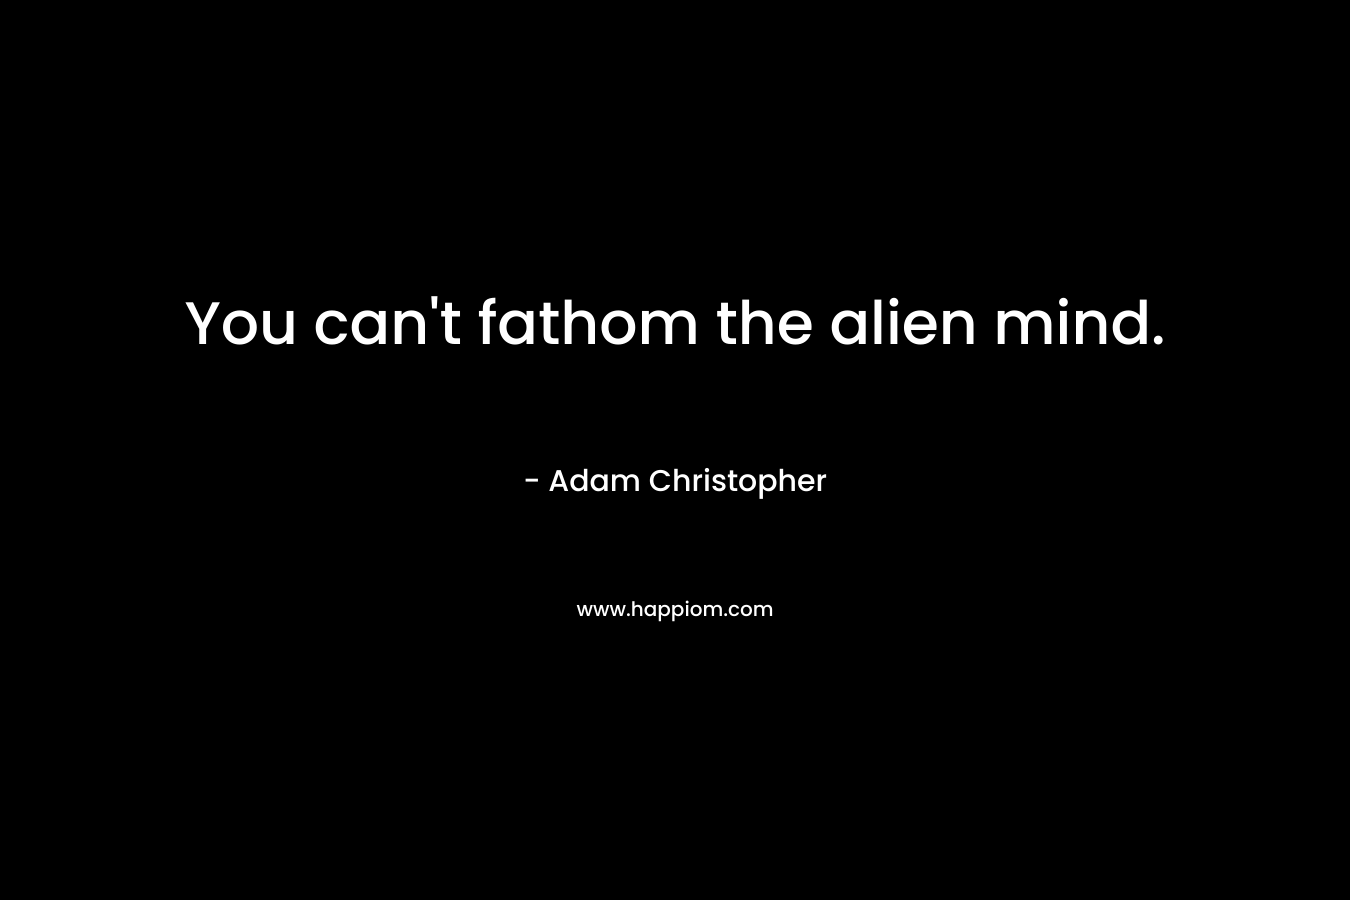 You can’t fathom the alien mind. – Adam Christopher